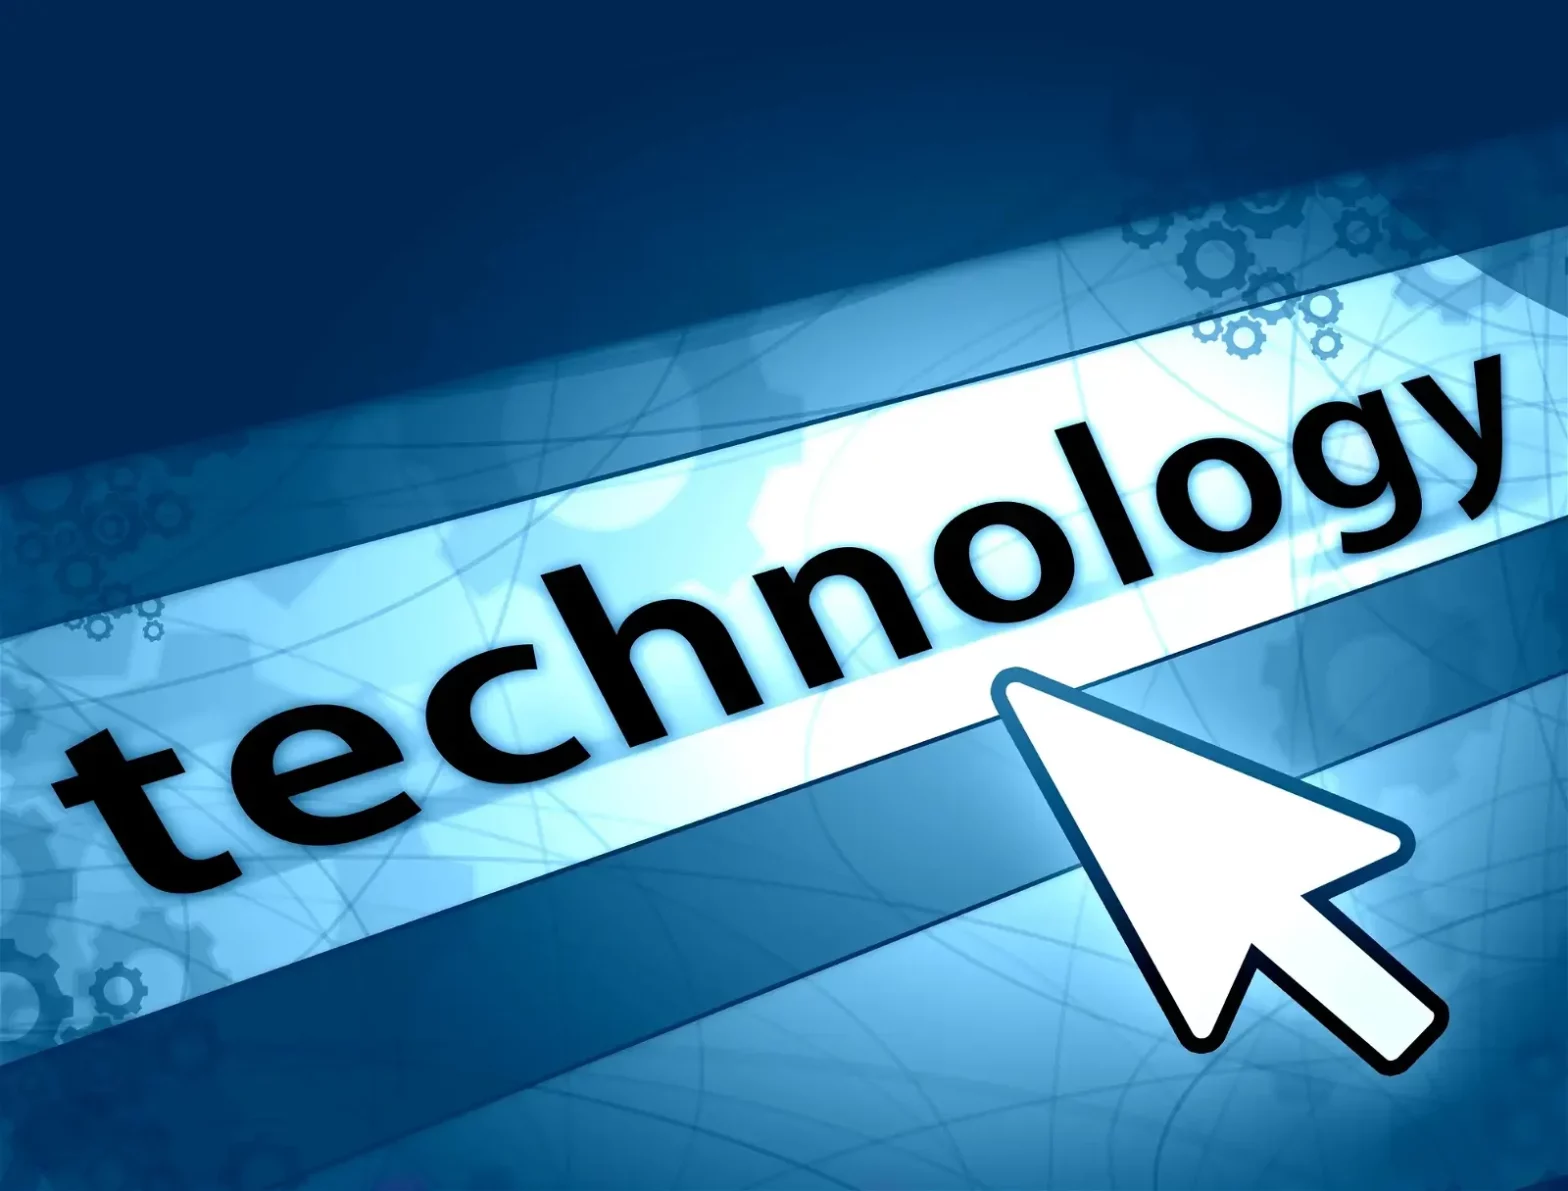 Technology education in Nigeria